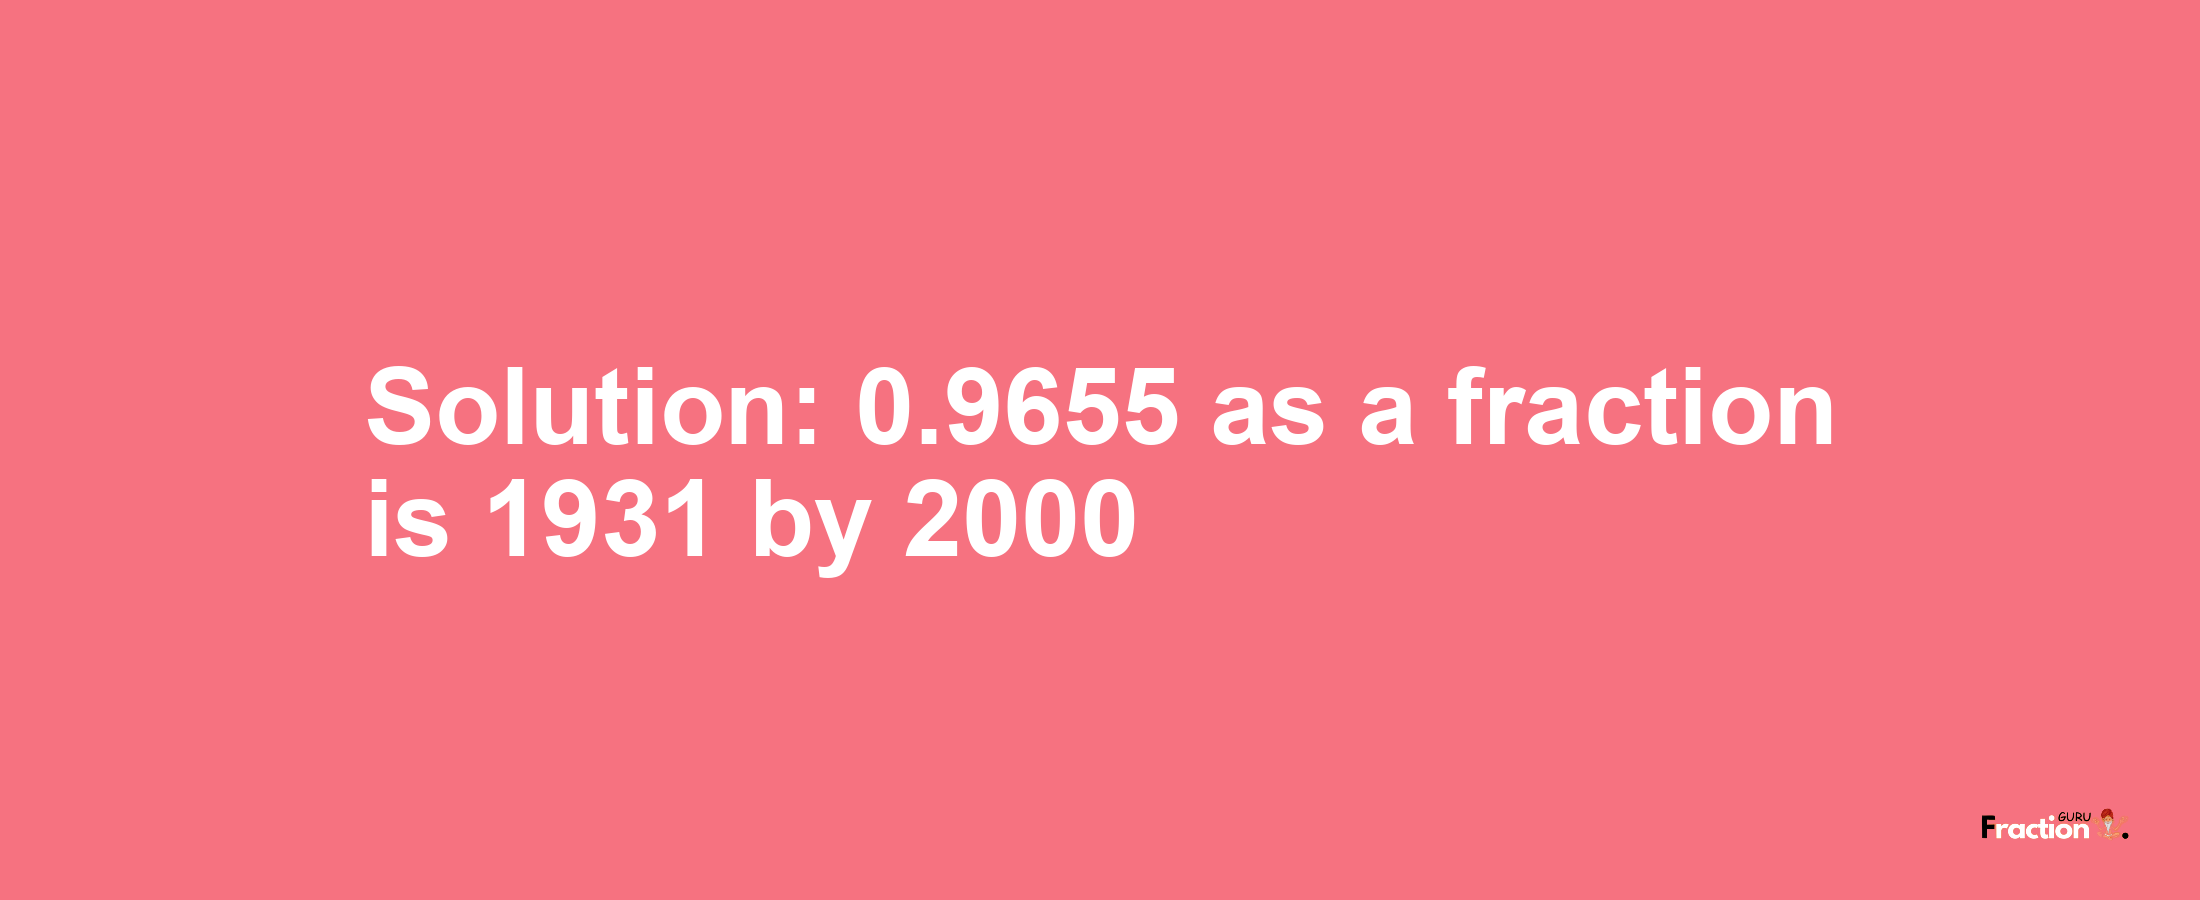 Solution:0.9655 as a fraction is 1931/2000